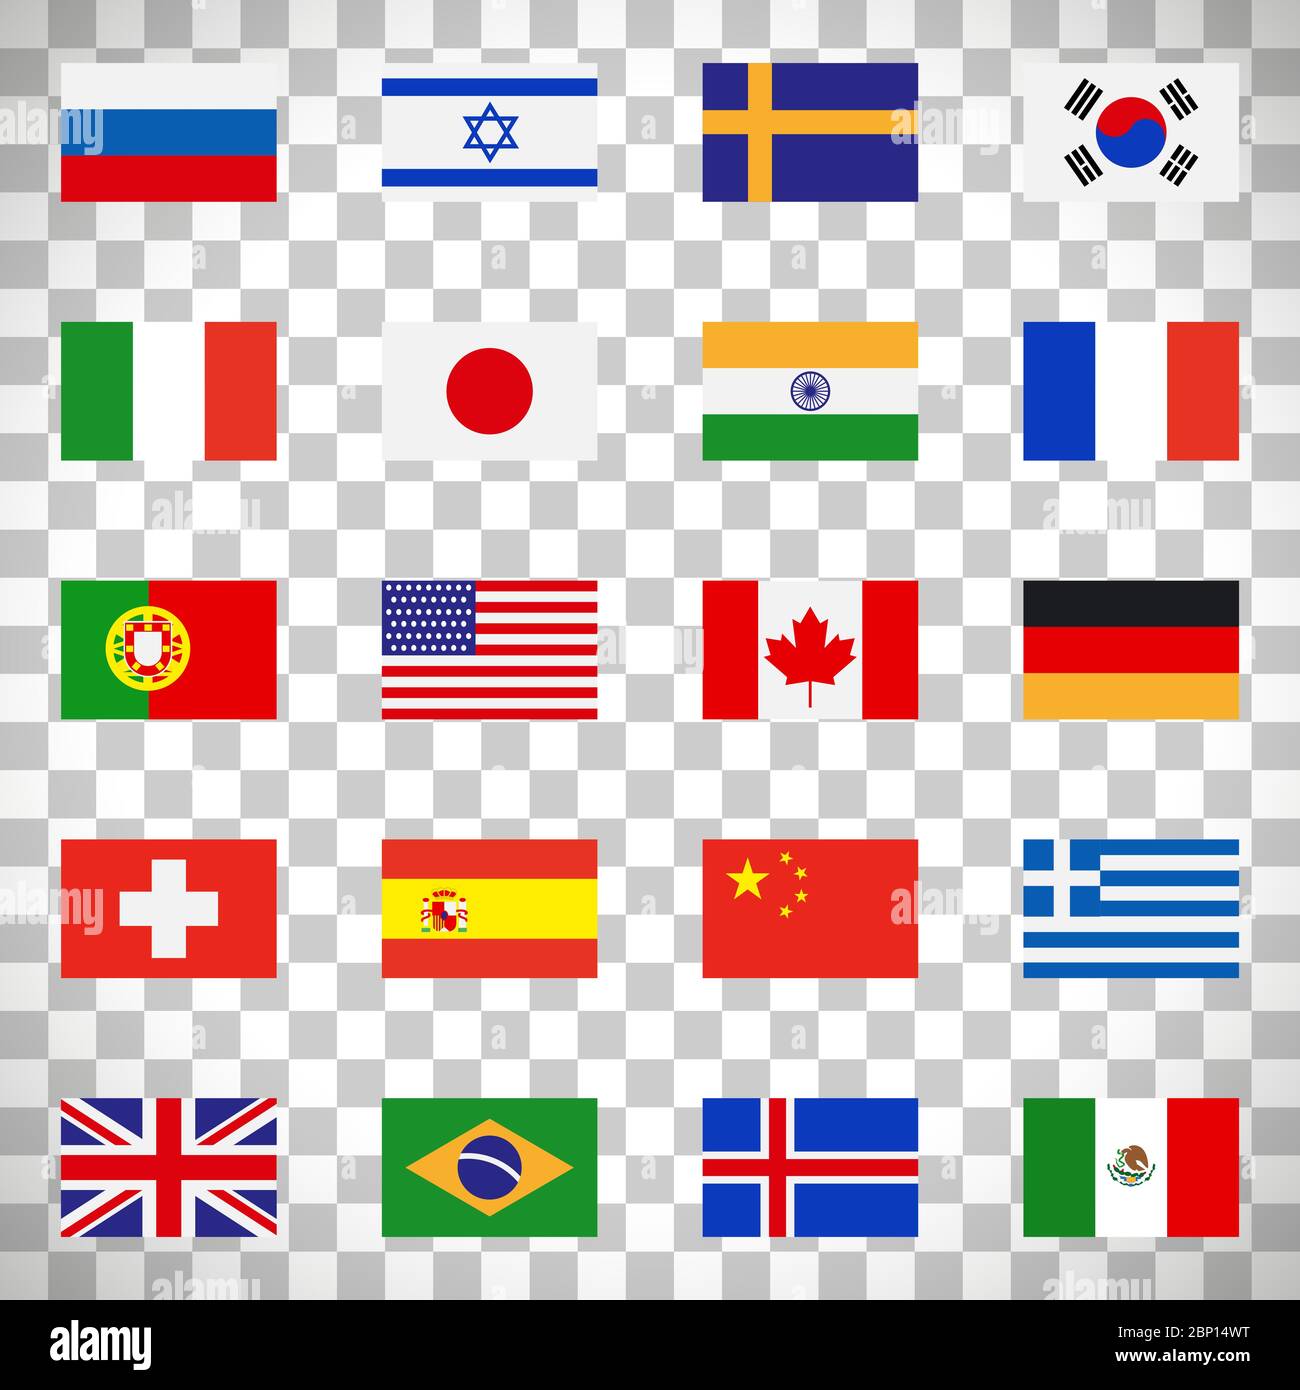 Flags icons in flat style isolated on transparent background, vector illustration Stock Vector